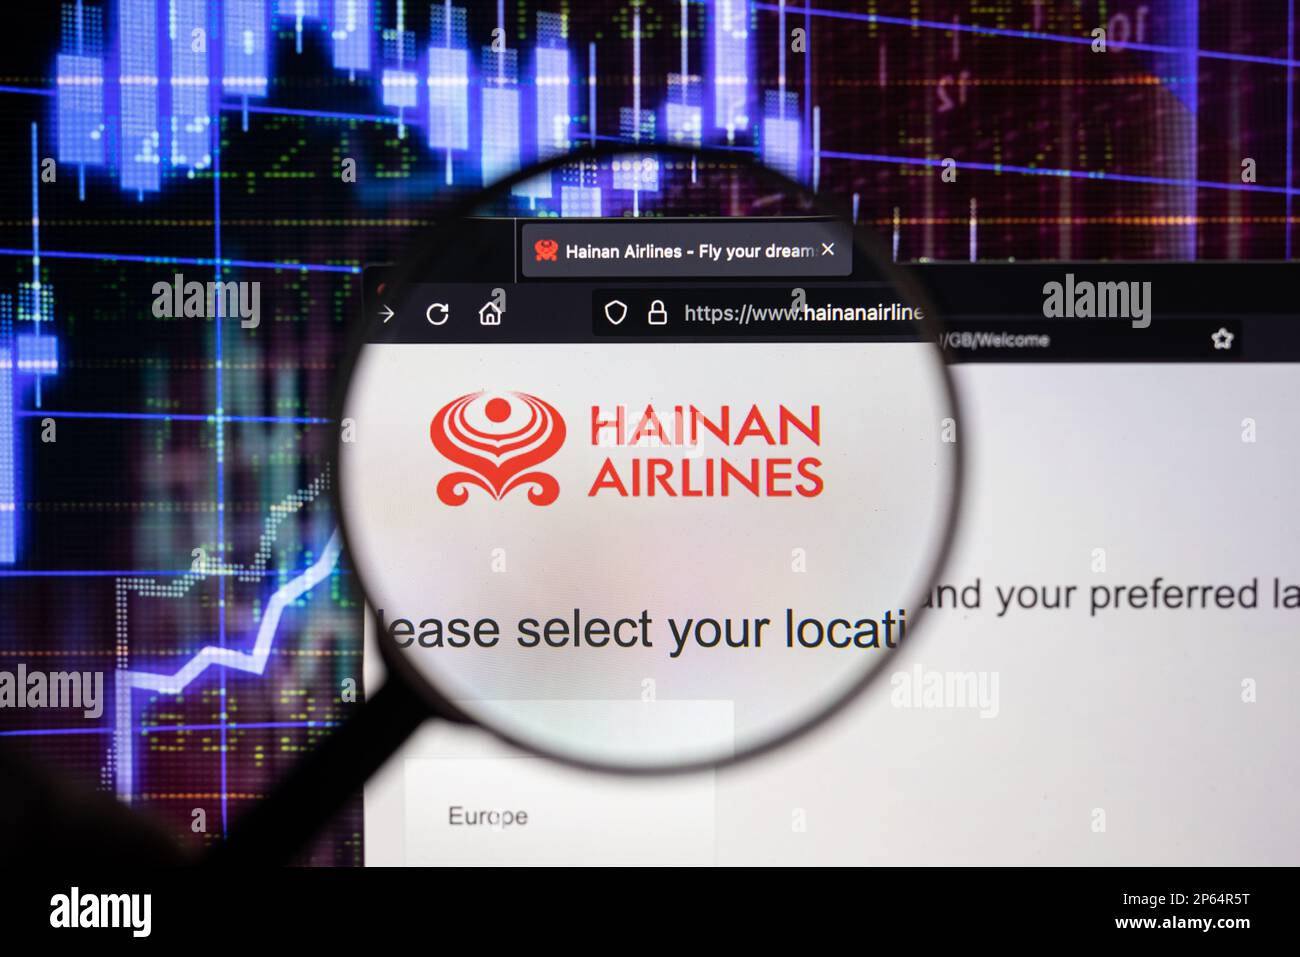 Hainan Airlines company logo on a website with blurry stock market developments in the background, seen on a screen through a magnifying glass Stock Photo